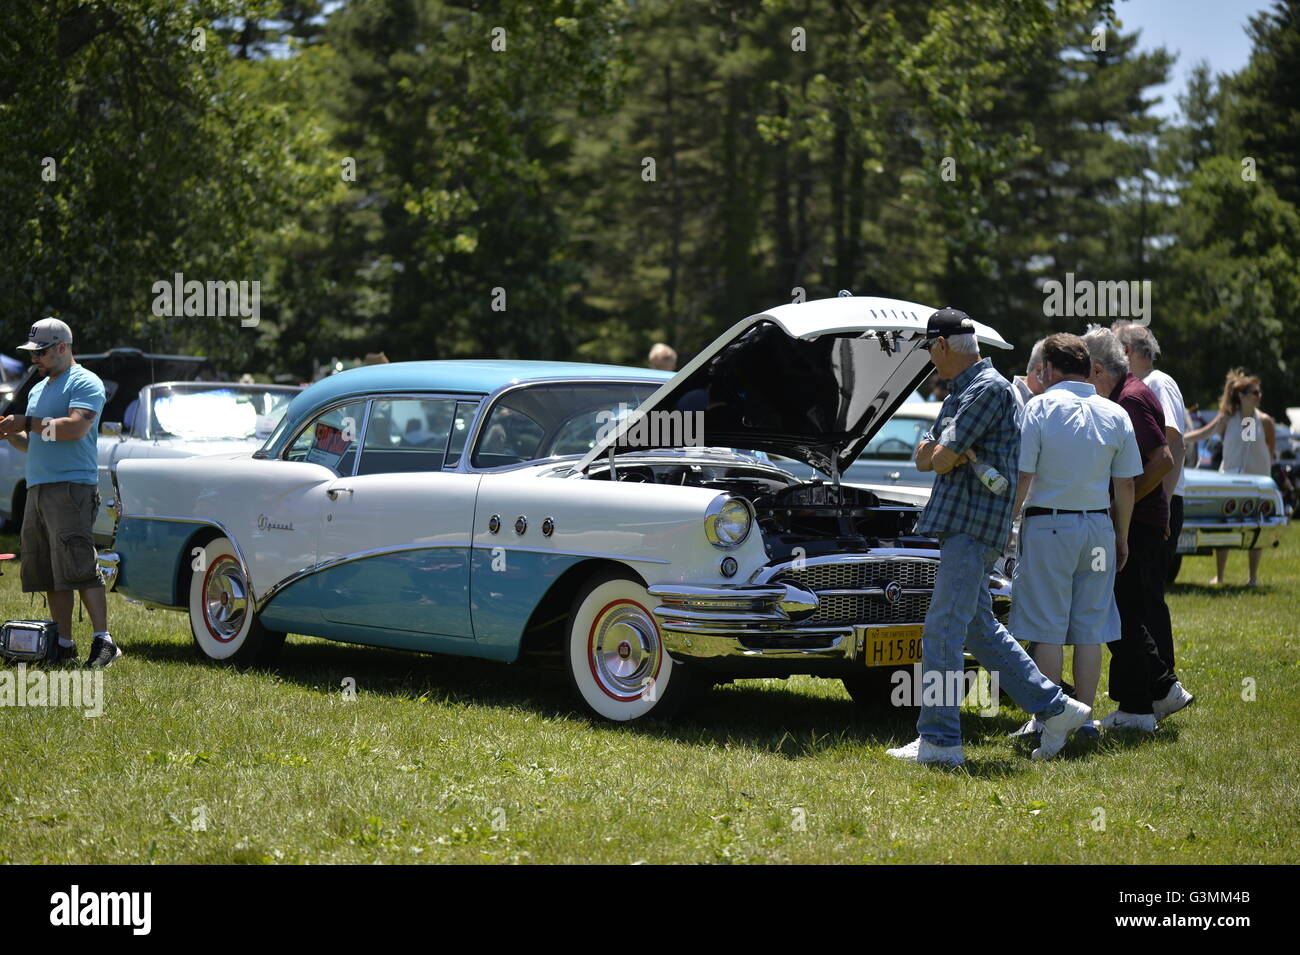 Westbury, New York, USA. June 12, 2016. Visitors are examining engine under the open hood of turquois and white 1955 Buick Special, owned by Rick D'Alessandro of Masapequa, at the Antique and Collectible Auto Show at the 50th Annual Spring Meet at Old Westbury Gardens, in the Gold Coast of Long Island, and sponsored by Greater New York Region, GNYR, Antique Automobile Club of America, AACA. Participating vehicles in the judged show included hundreds of domestic and foreign, antique, classic, collectible, and modern cars. Stock Photo